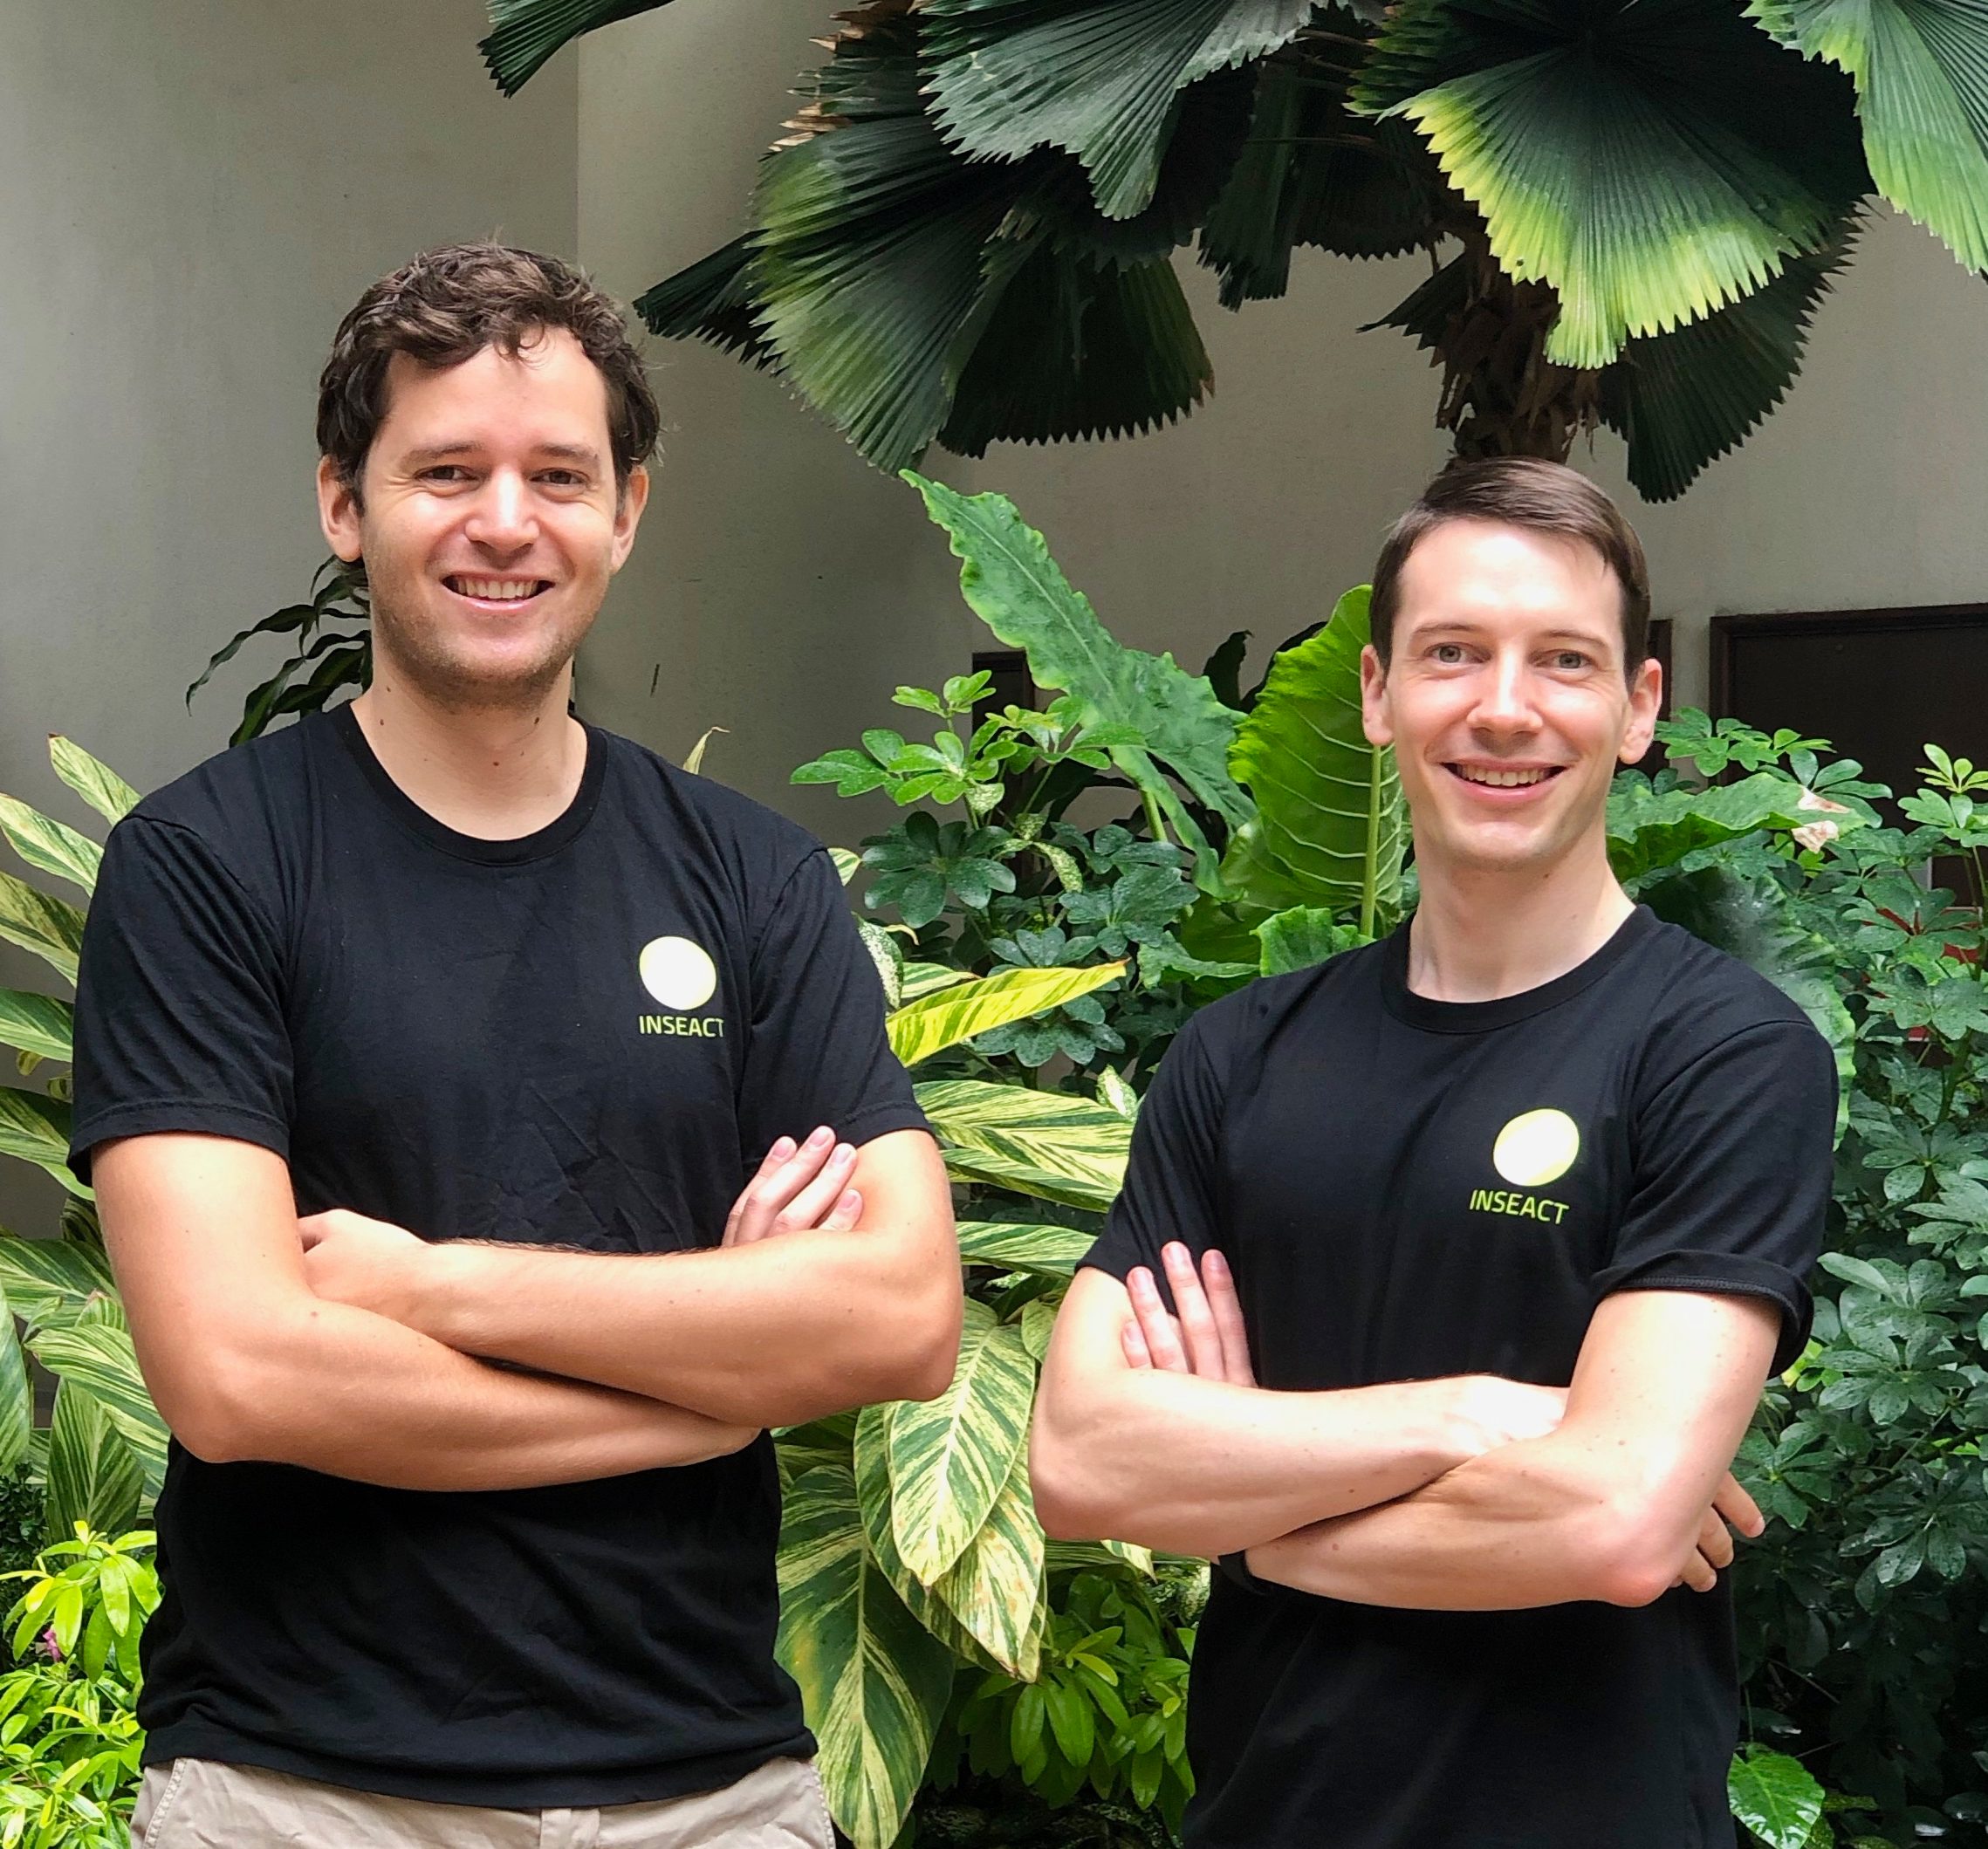 SG's alternative insect protein startup INSEACT bags seed funding